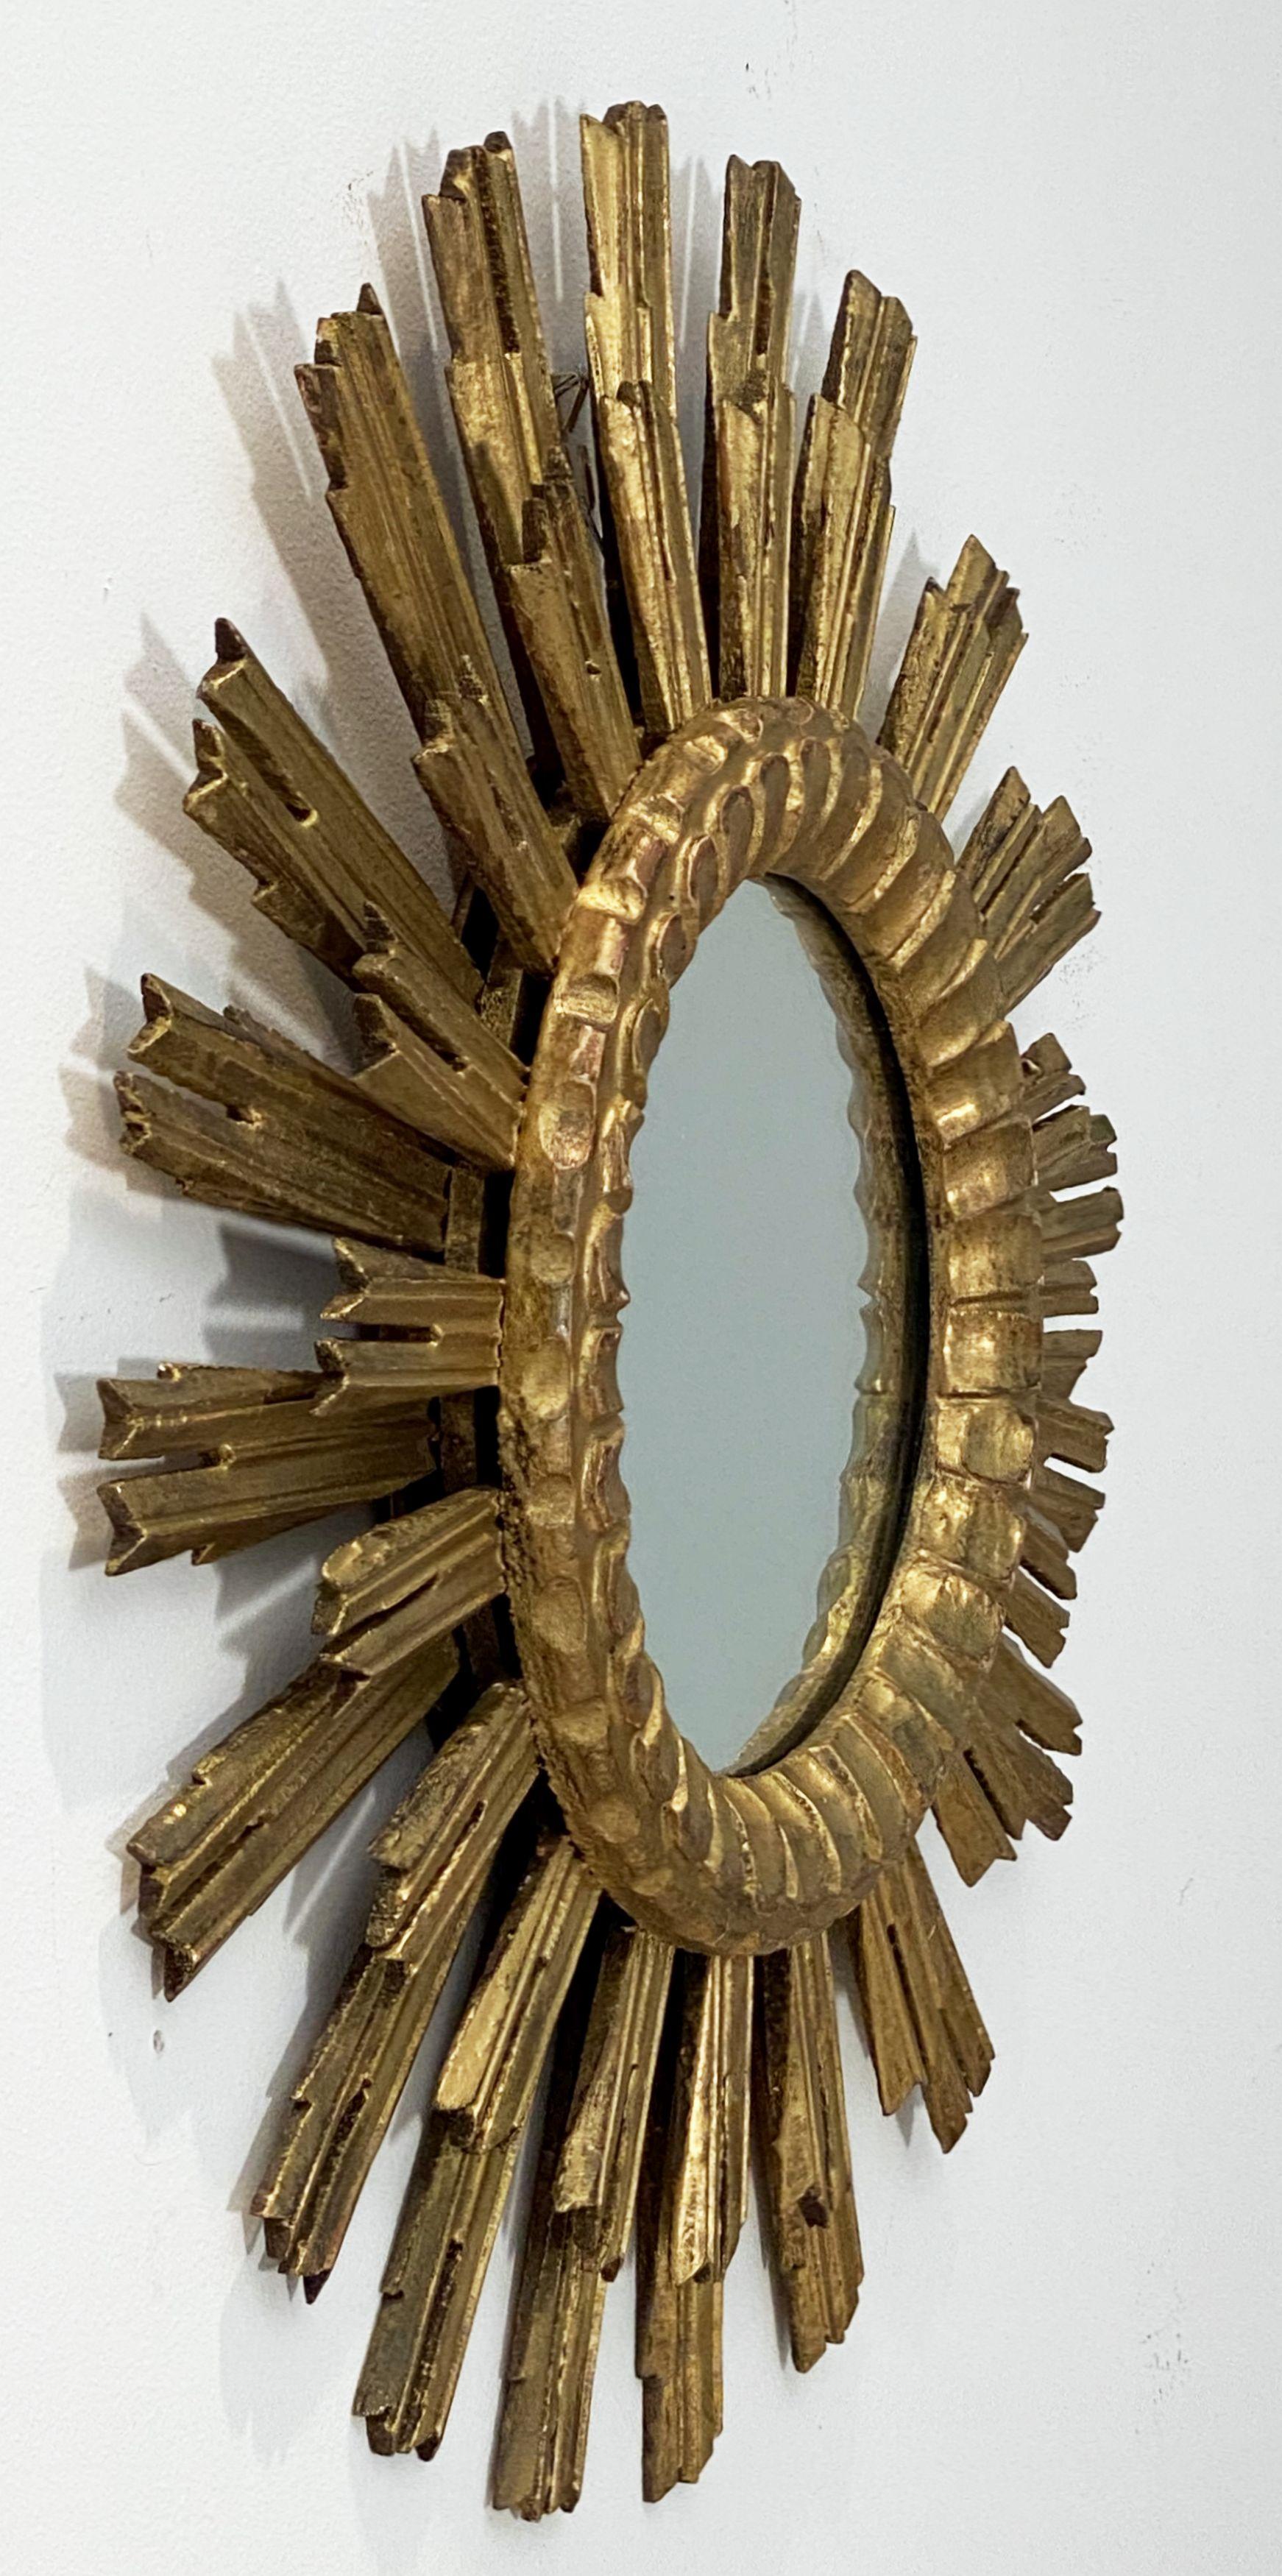 A lovely French gilt sunburst (or starburst) mirror with a double row of gilded wooden rays arranged around the original glass mirror plate glass center.

Measures: Diameter of 24 1/2 inches

 